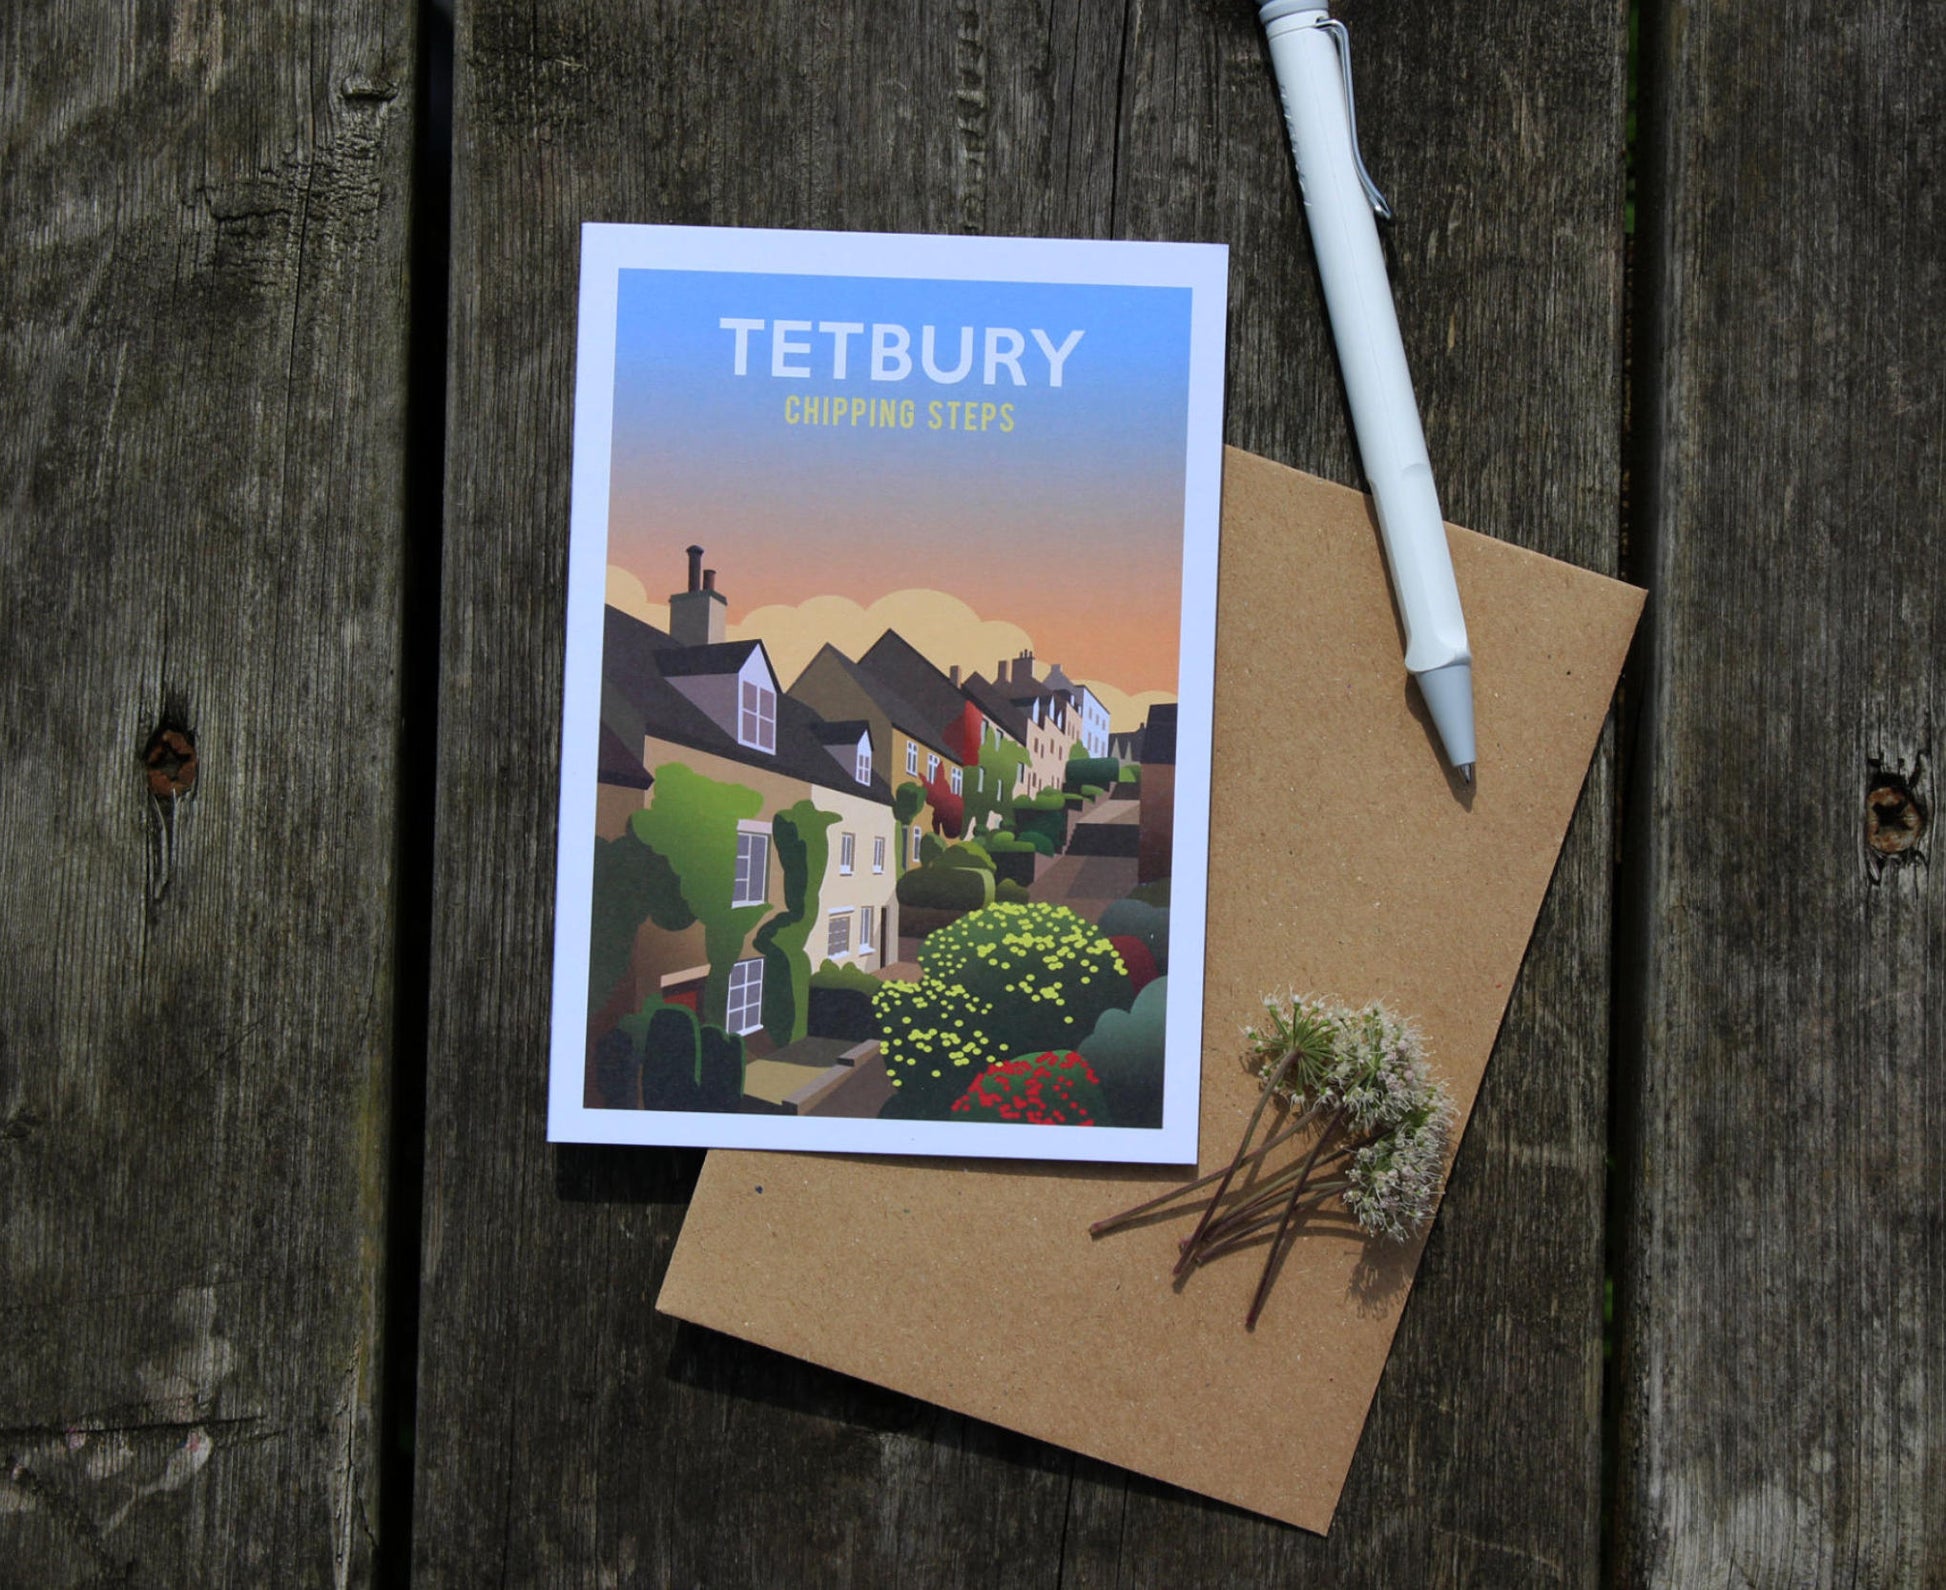 Tetbury Chipping Steps Greeting Card flat on table